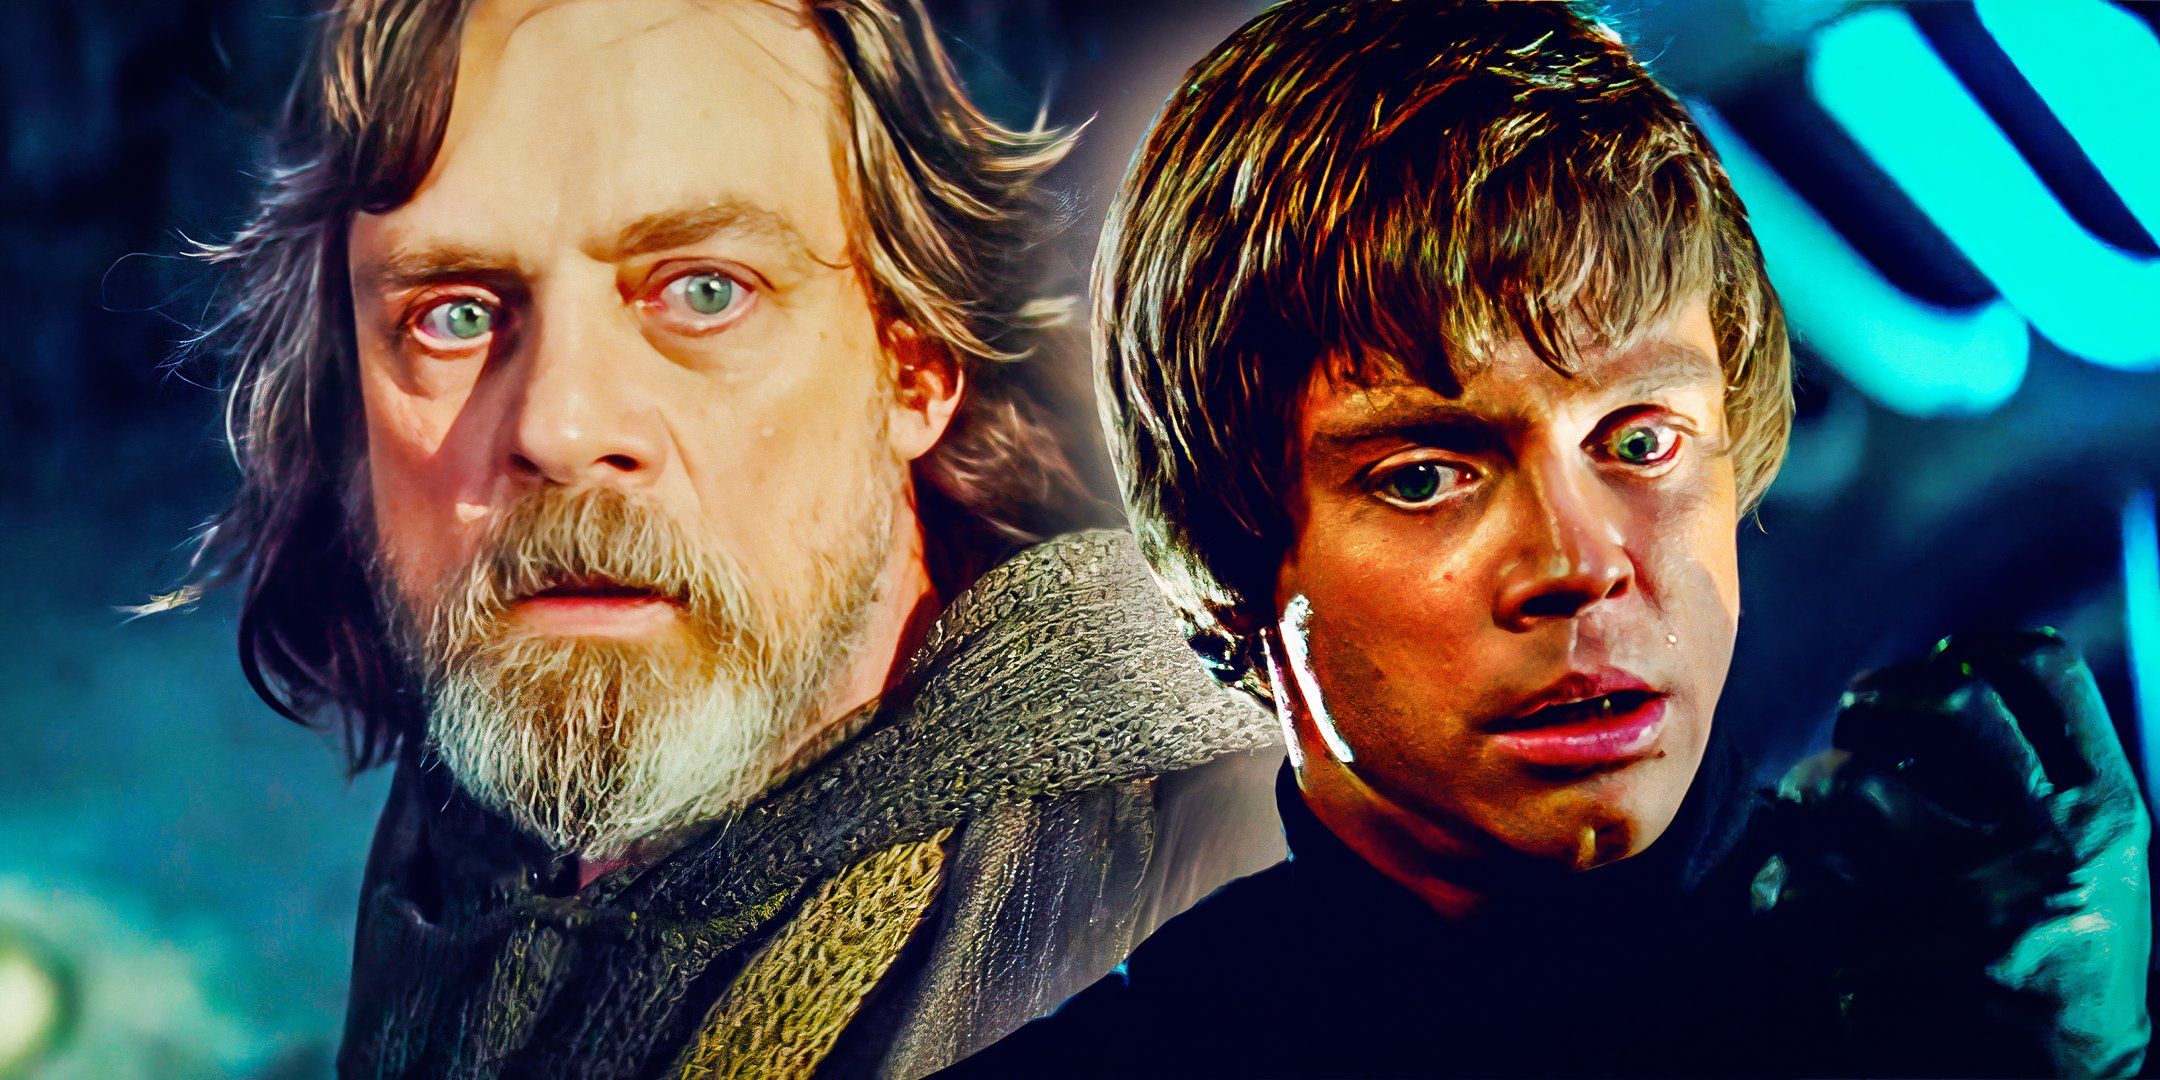 Luke Skywalker (Mark Hamill) as an older man in Star Wars: The Last Jedi and as a young man looking concerned in Return of the Jedi